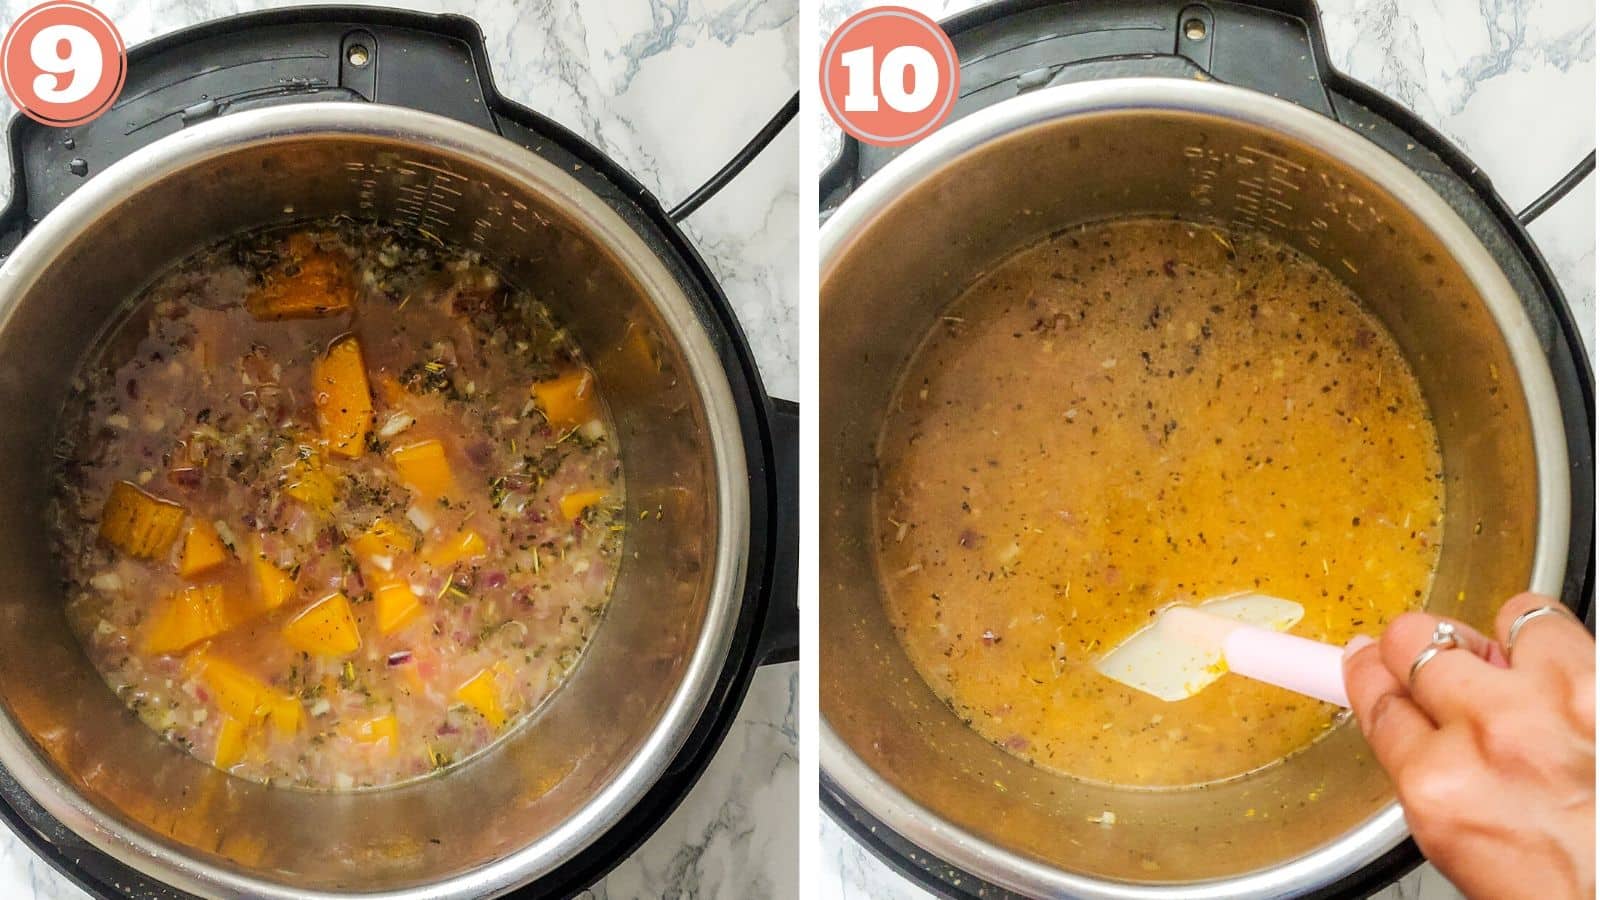 Breaking down the cooked squash in the Instant Pot 